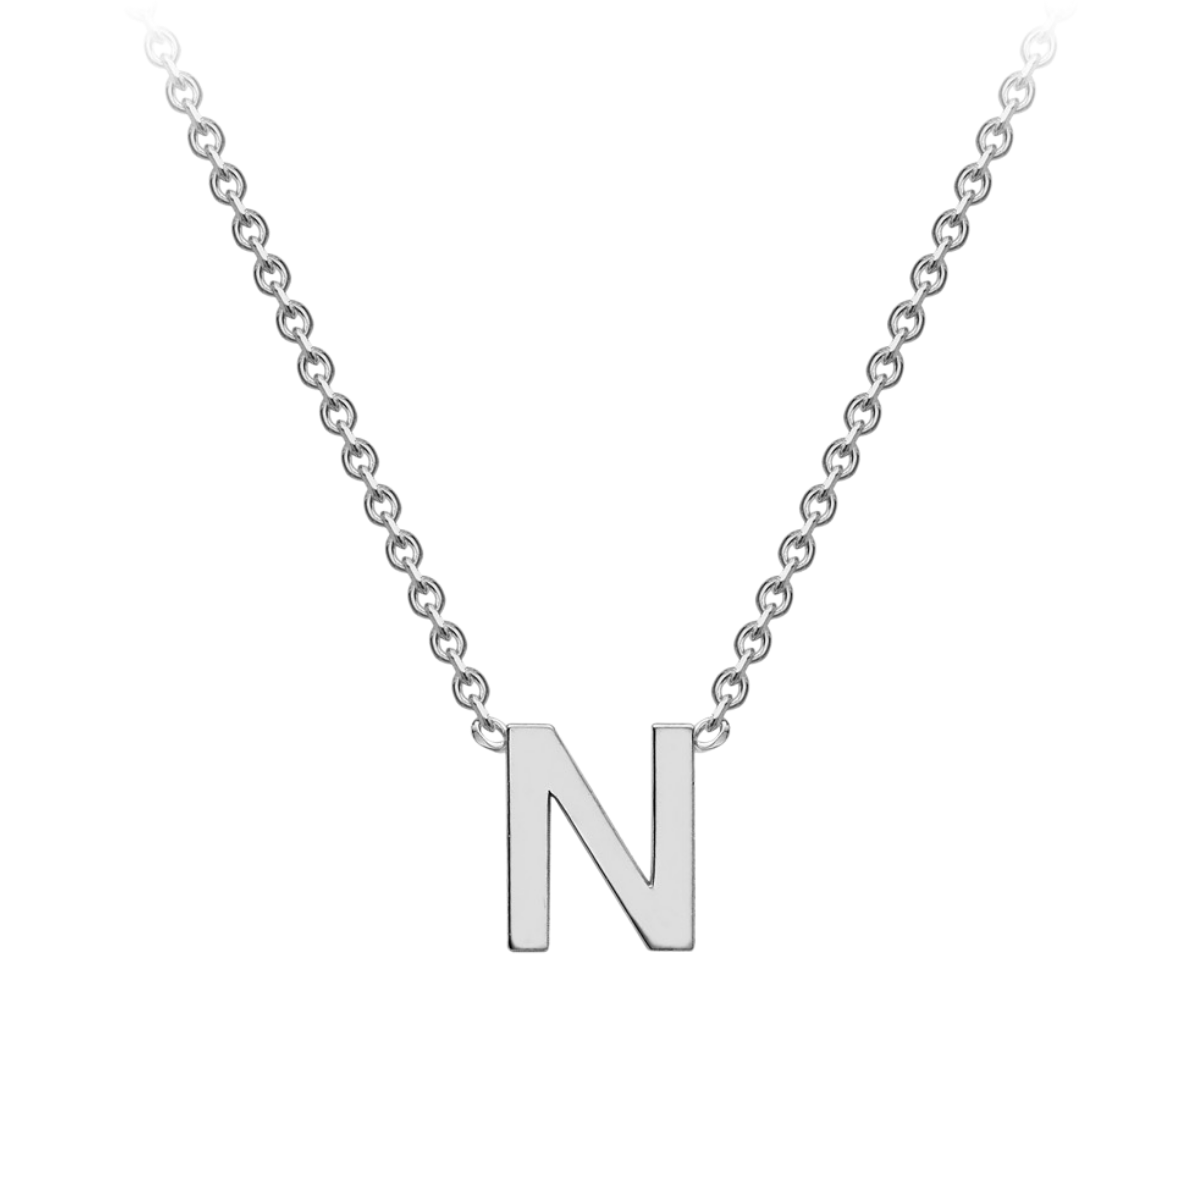 PETITE 'N' INITIAL NECKLACE | 9K SOLID WHITE GOLD